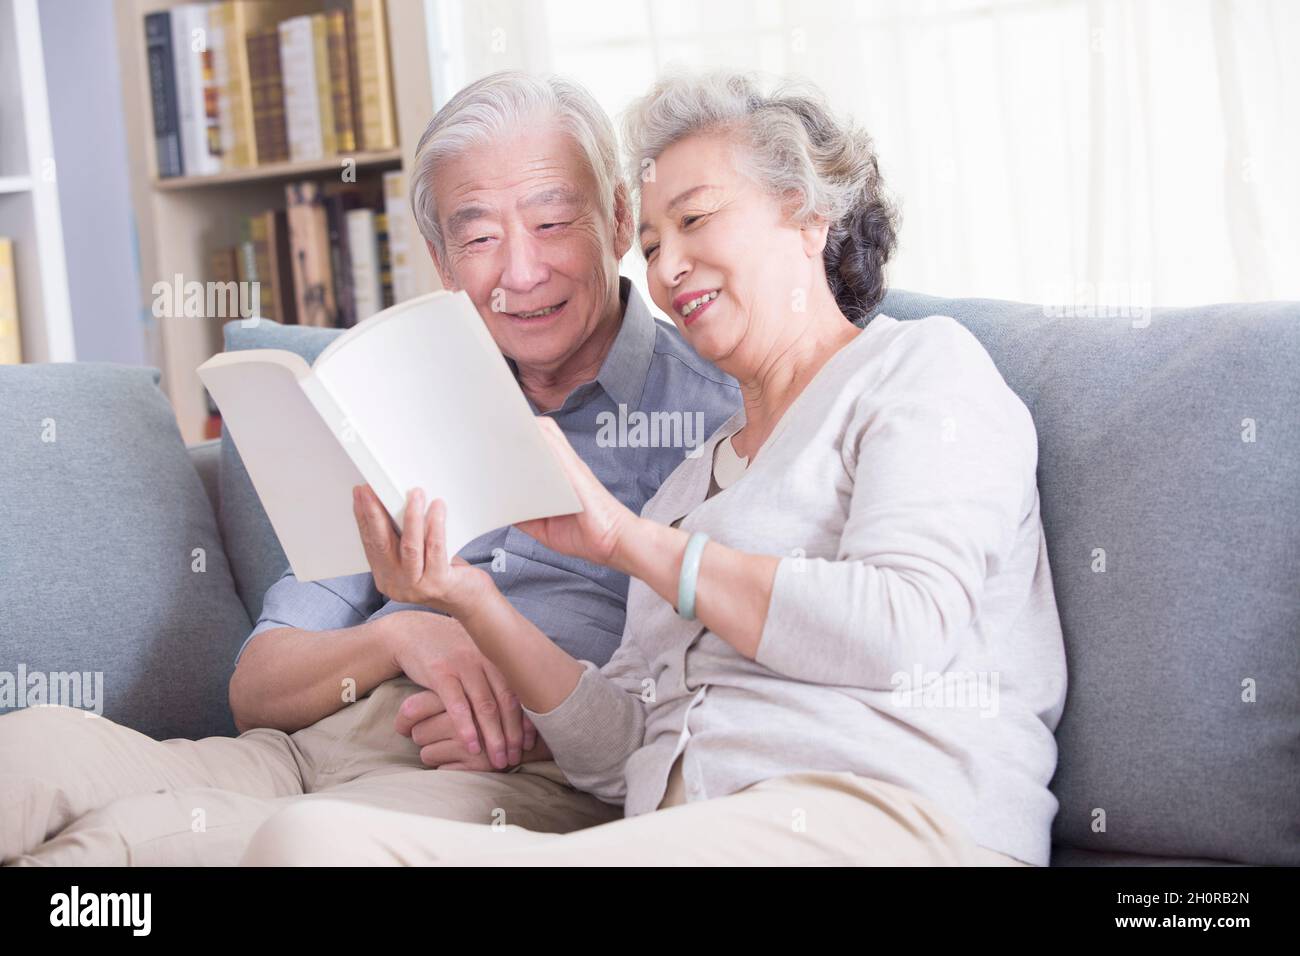 Stay At Home Elderly Couple Reading Books Stock Photo Alamy